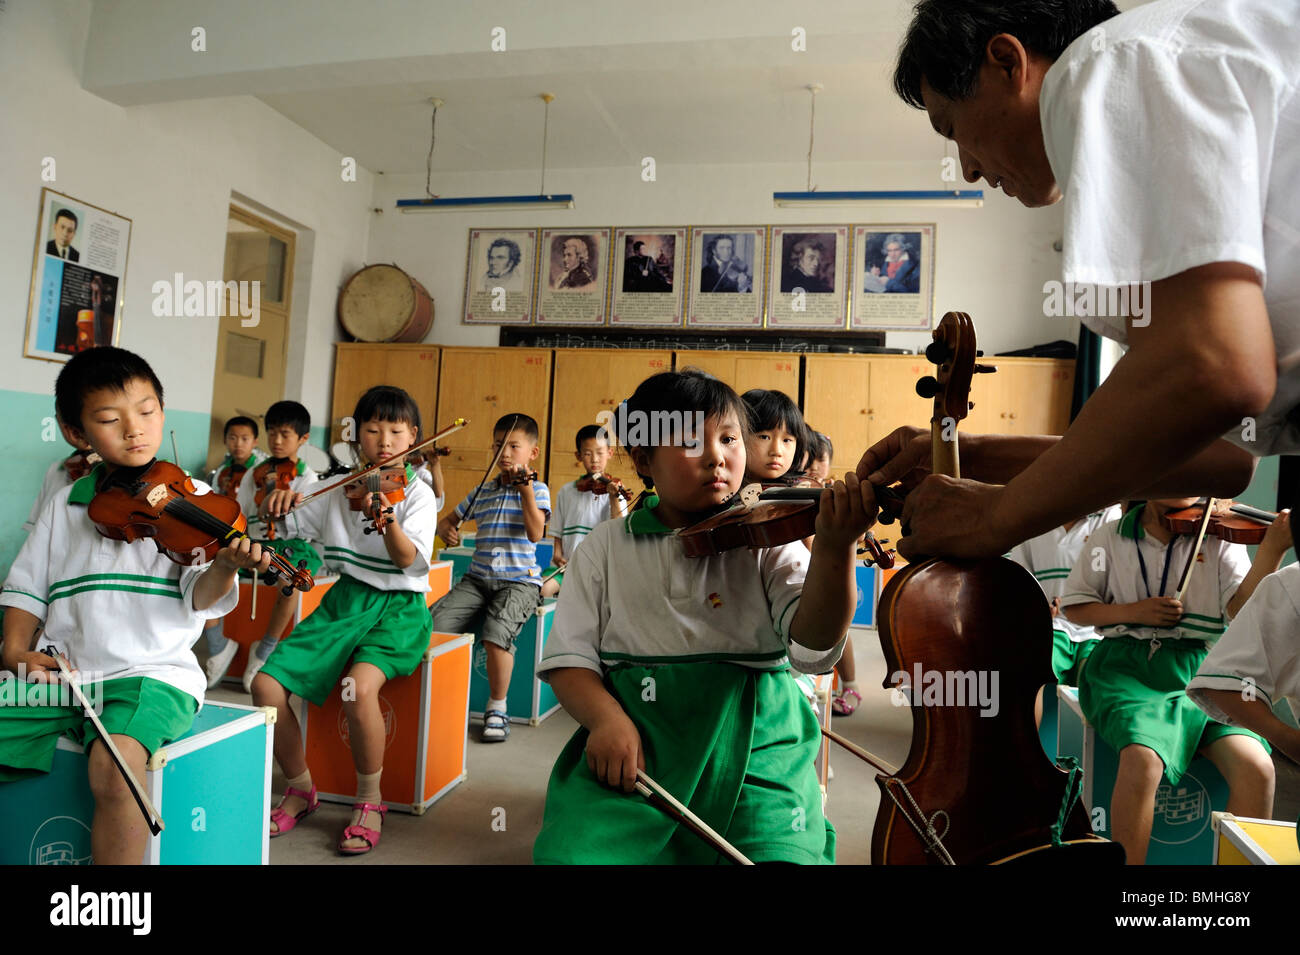 Mr. Gao Defa teaching students to play violins during a music lesson at Dawangwu primary school in Pinggu, Beijing, China. 2010 Stock Photo